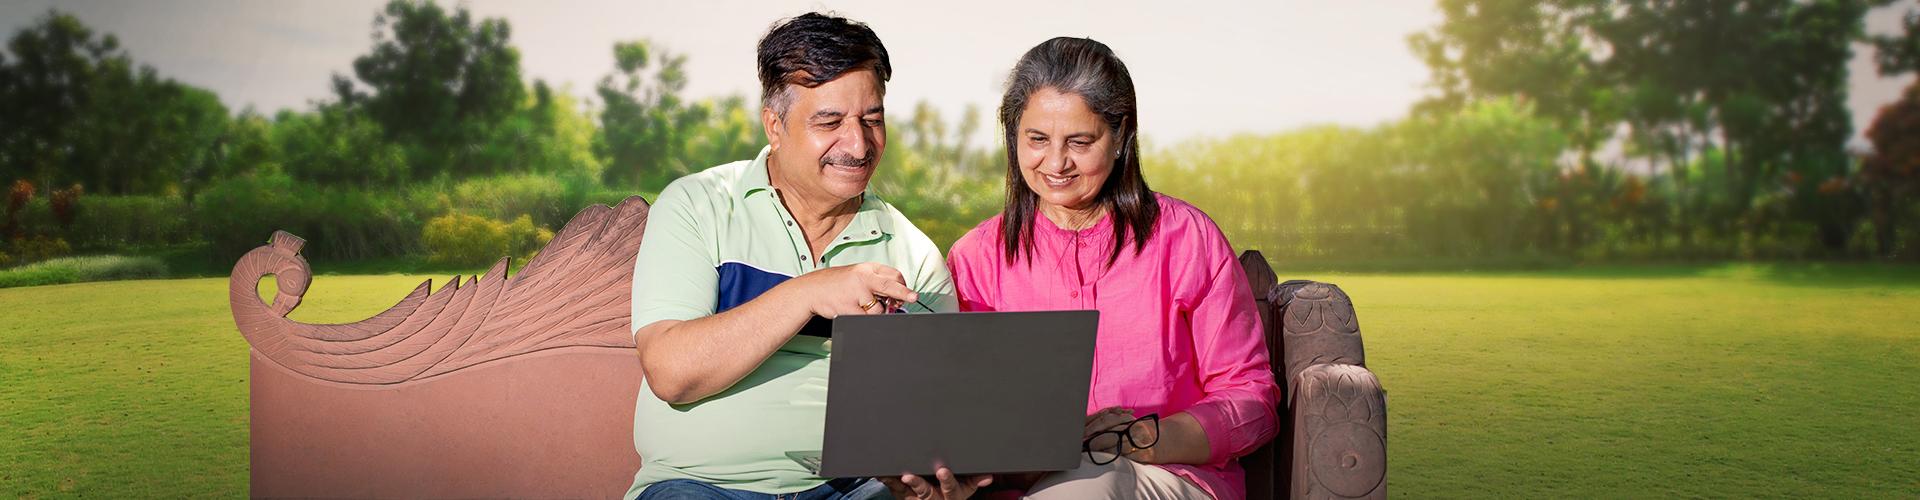 Elderly couple choosing the right lenses on the computer